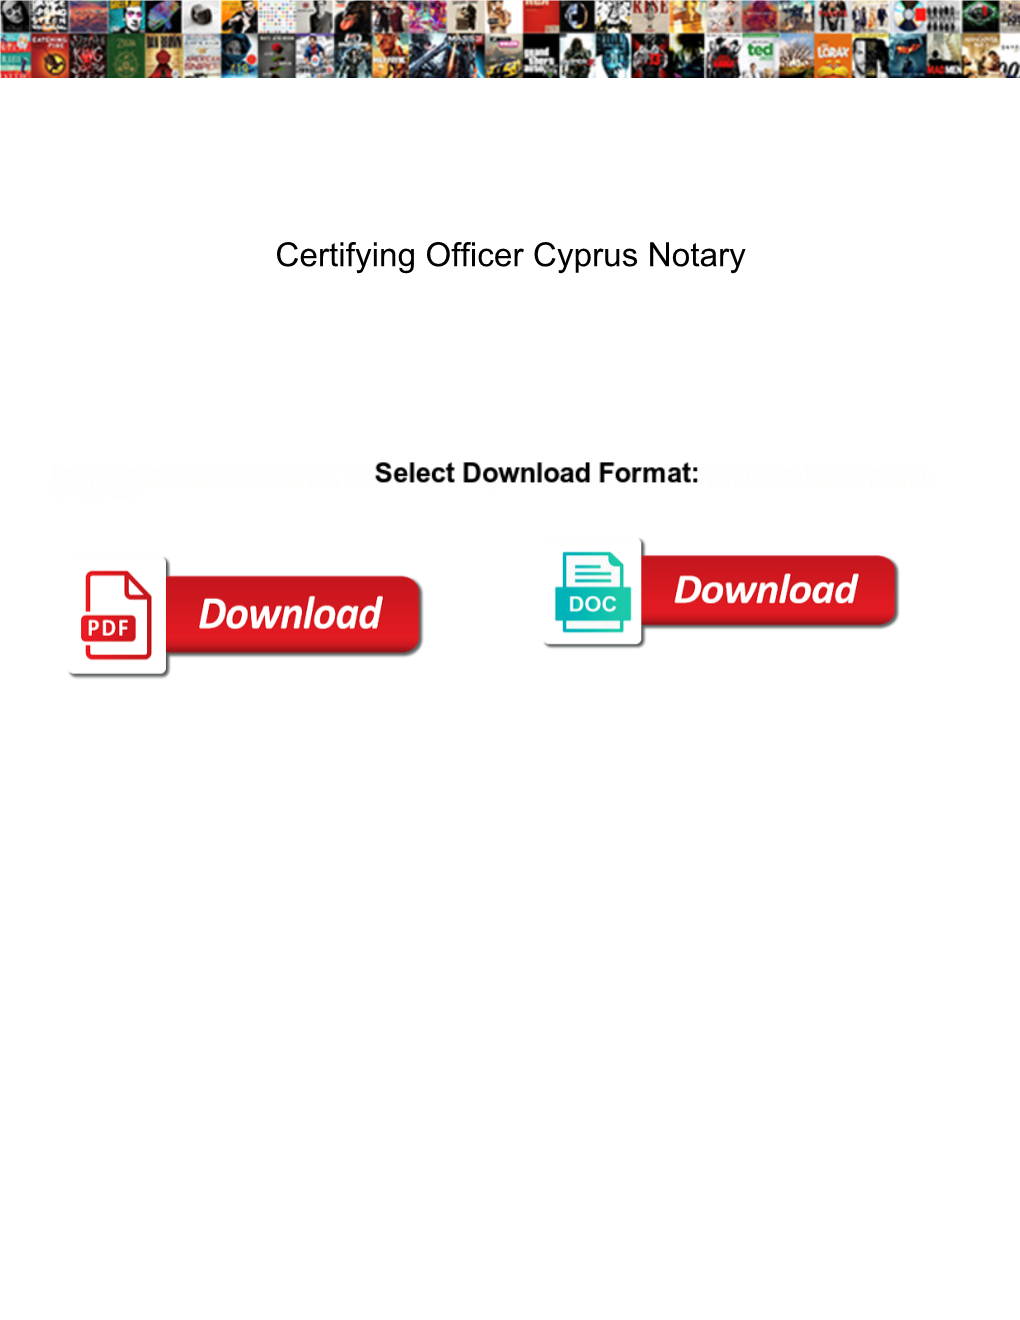 Certifying Officer Cyprus Notary